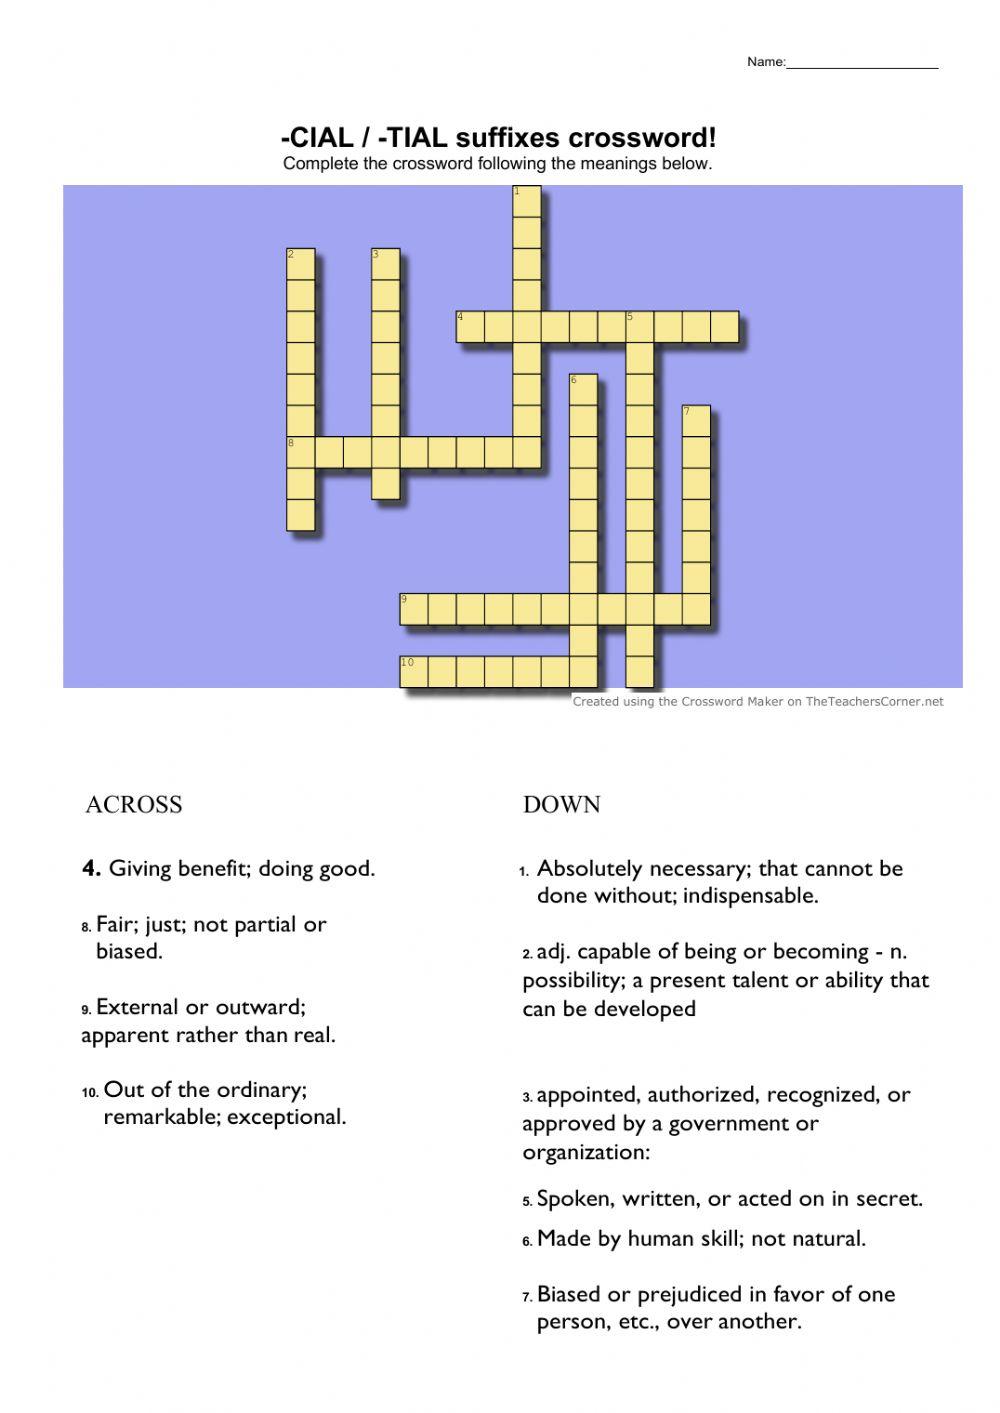 -cial - -tial suffixes crossword